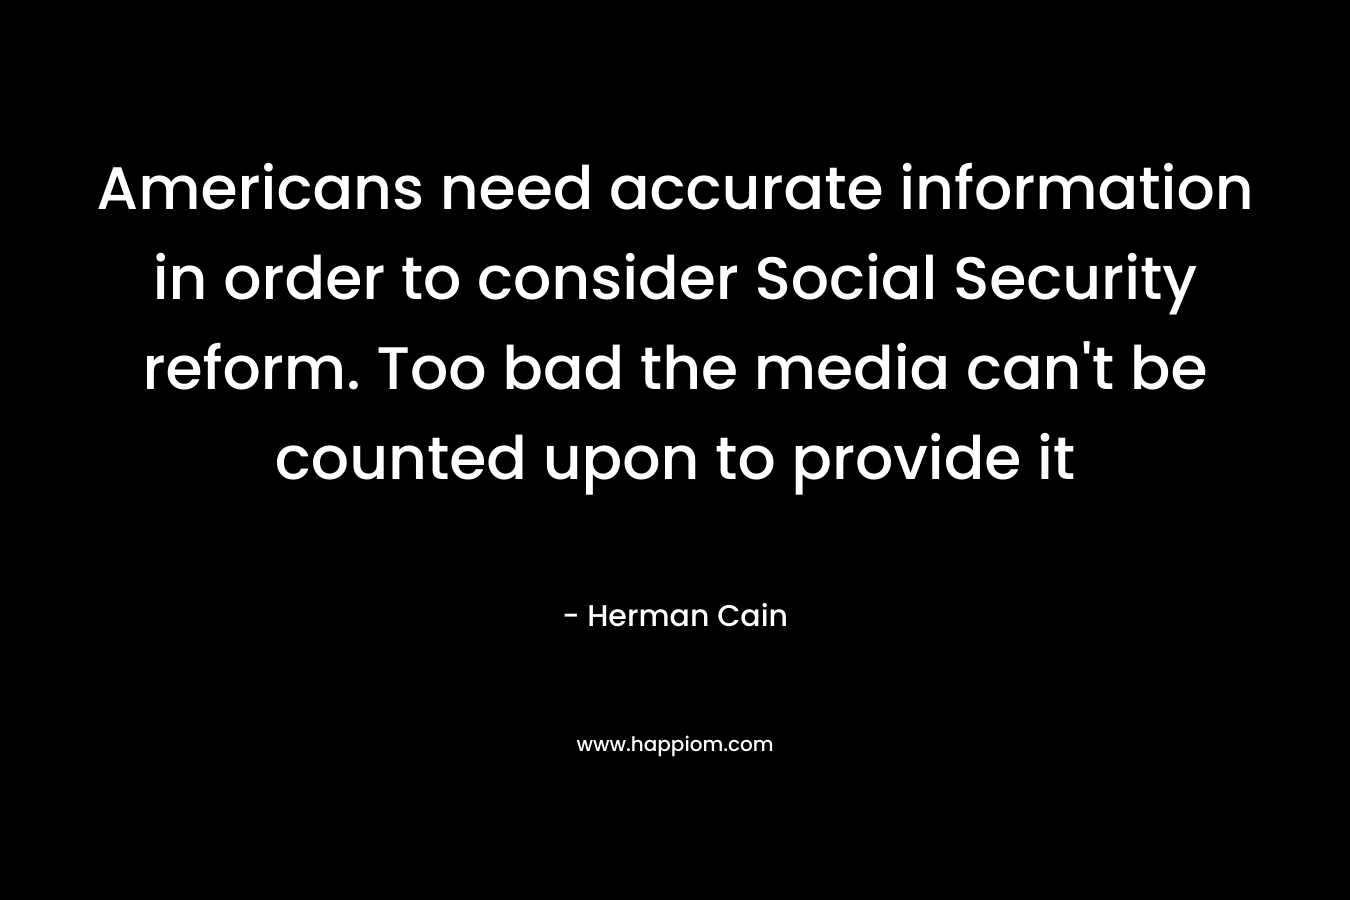 Americans need accurate information in order to consider Social Security reform. Too bad the media can't be counted upon to provide it